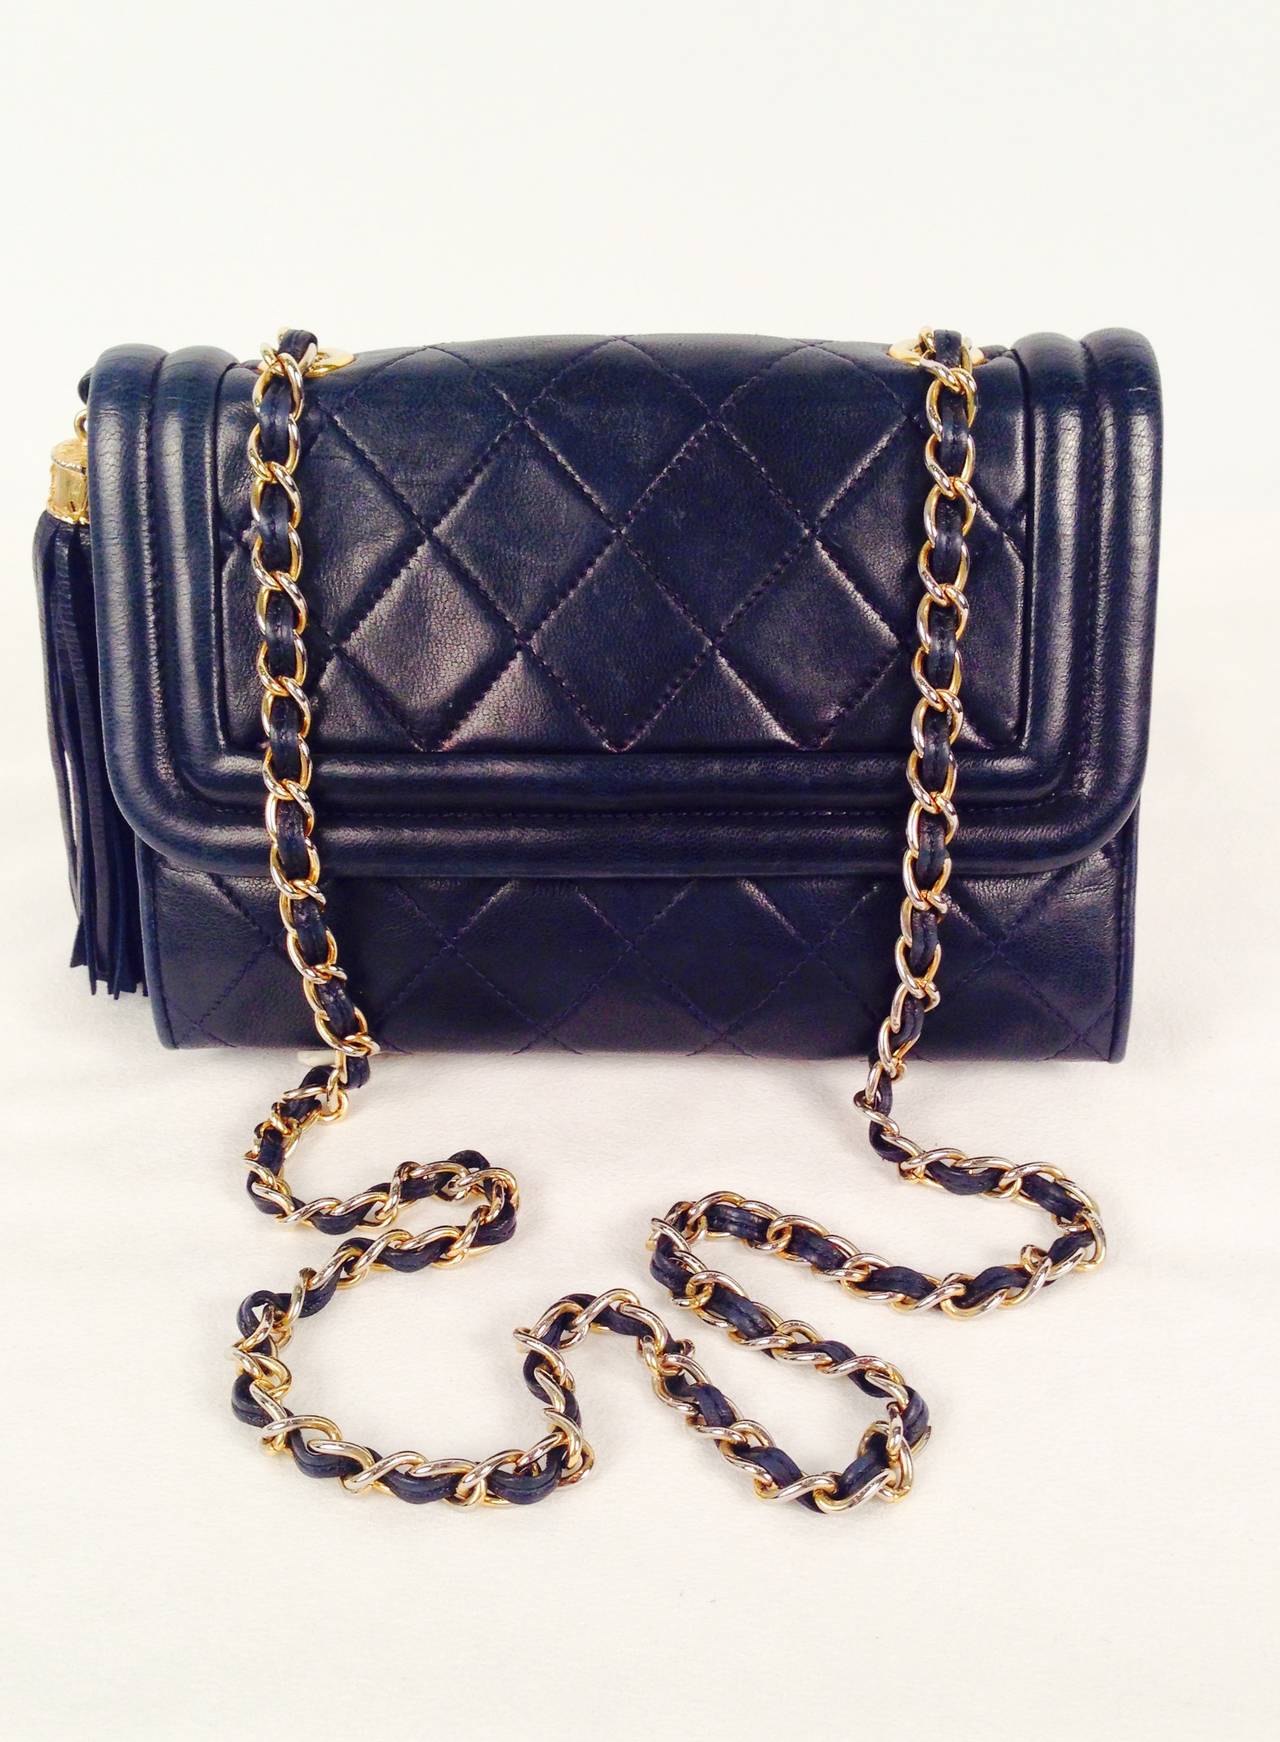 Vintage Chanel Navy Quilted Lambskin Single Flap Bag was crafted between 1989 and 1991.  Fit for a lady, bag features single flap, gilt woven leather shoulder strap, side tassel key charm and distinctive piping.  Interior is fully lined in luxurious